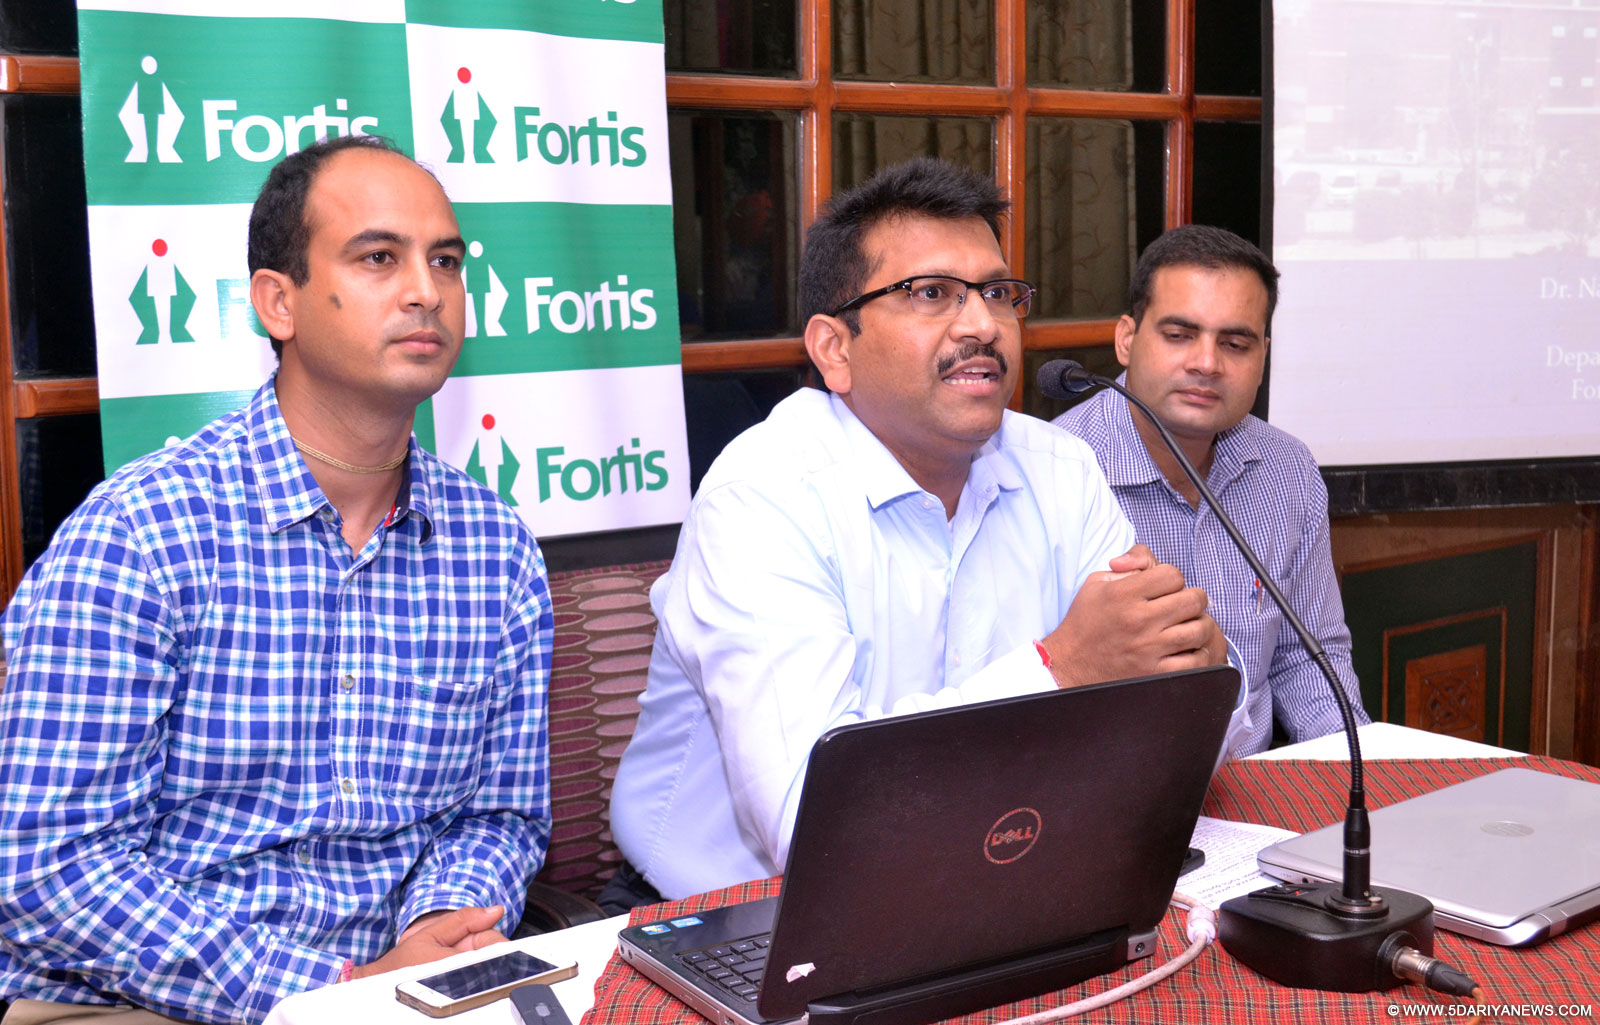 It’s preventable, but cervical cancer still second most common: Fortis doctors